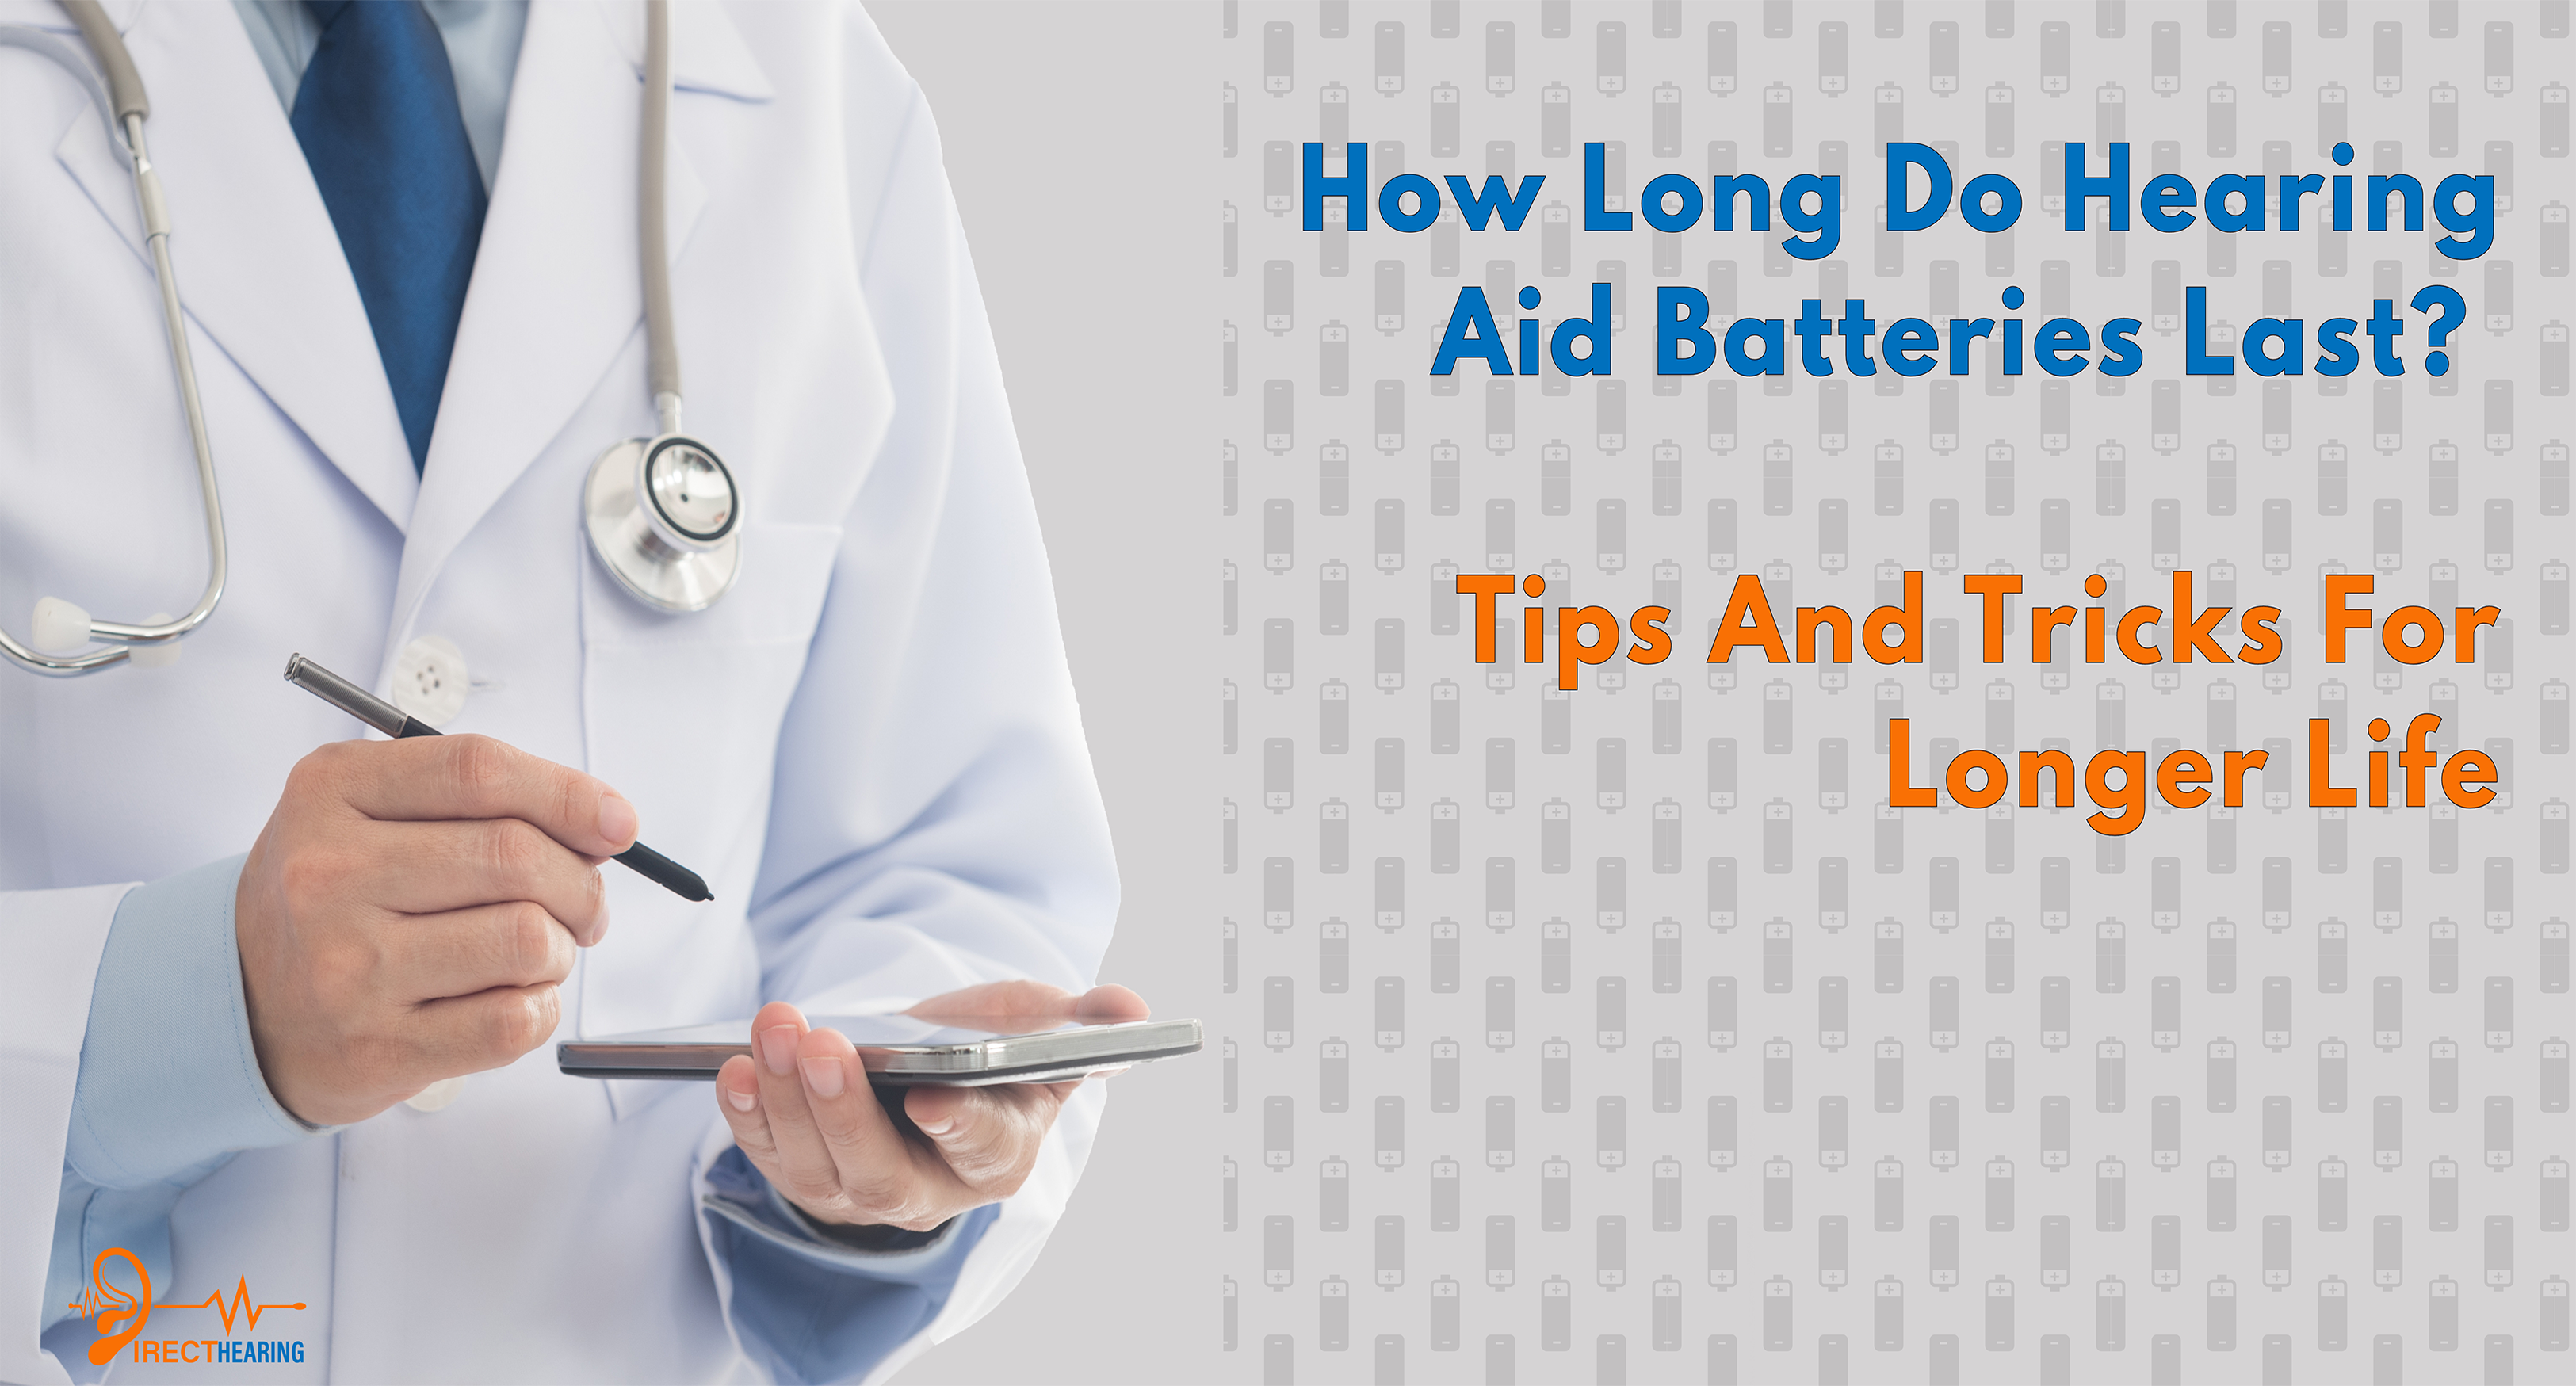 How Long Do Hearing Aid Batteries Last? Tips and Tricks for Longer Life